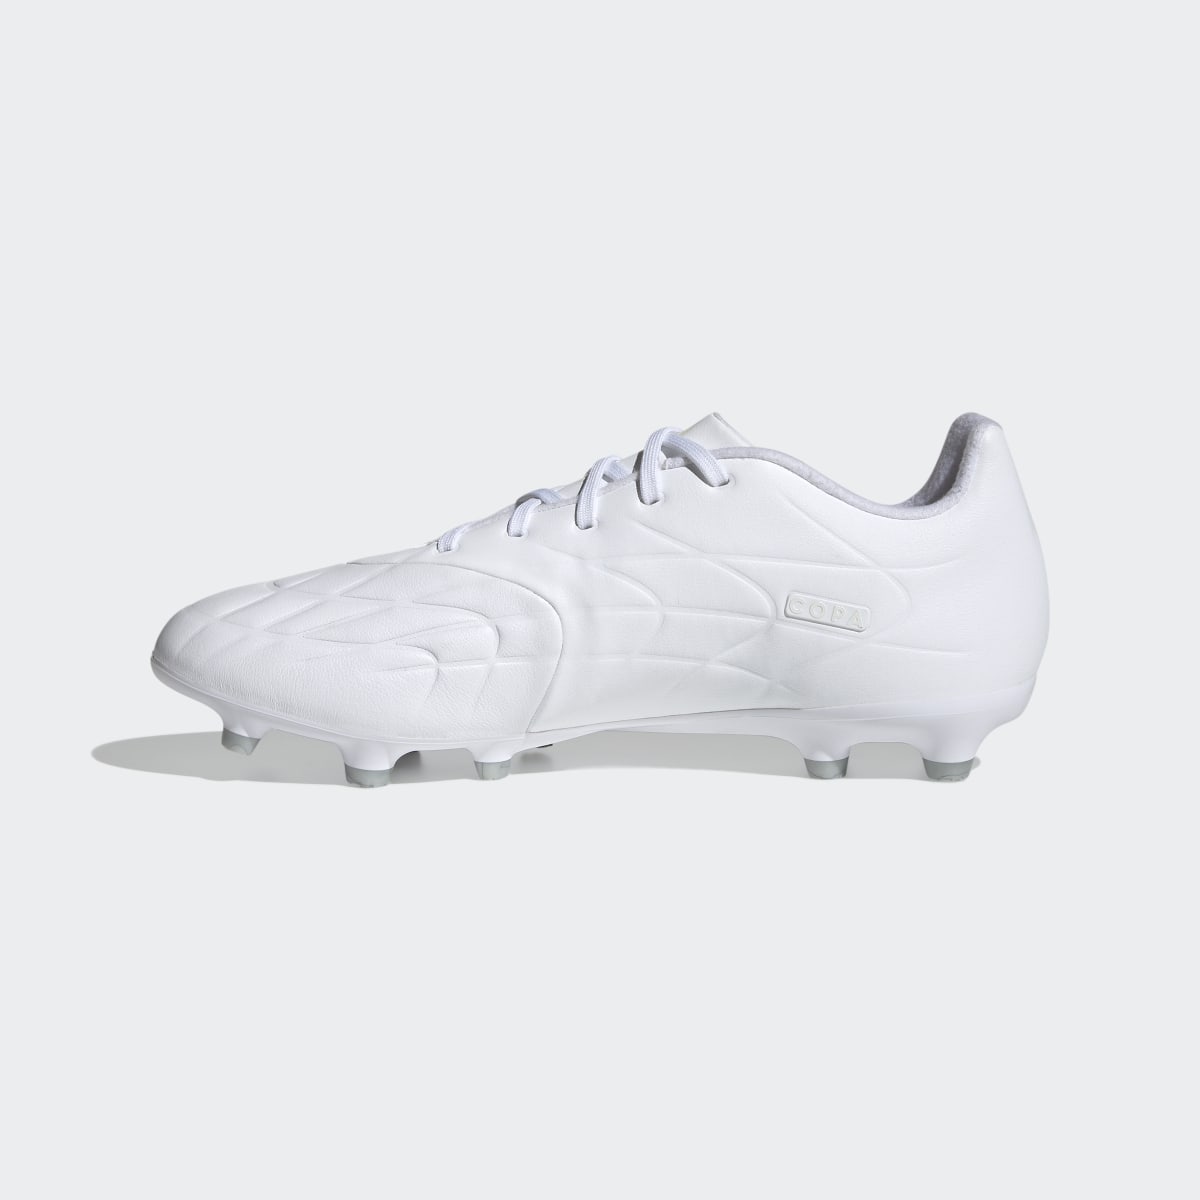 Adidas Copa Pure.3 Firm Ground Boots. 7